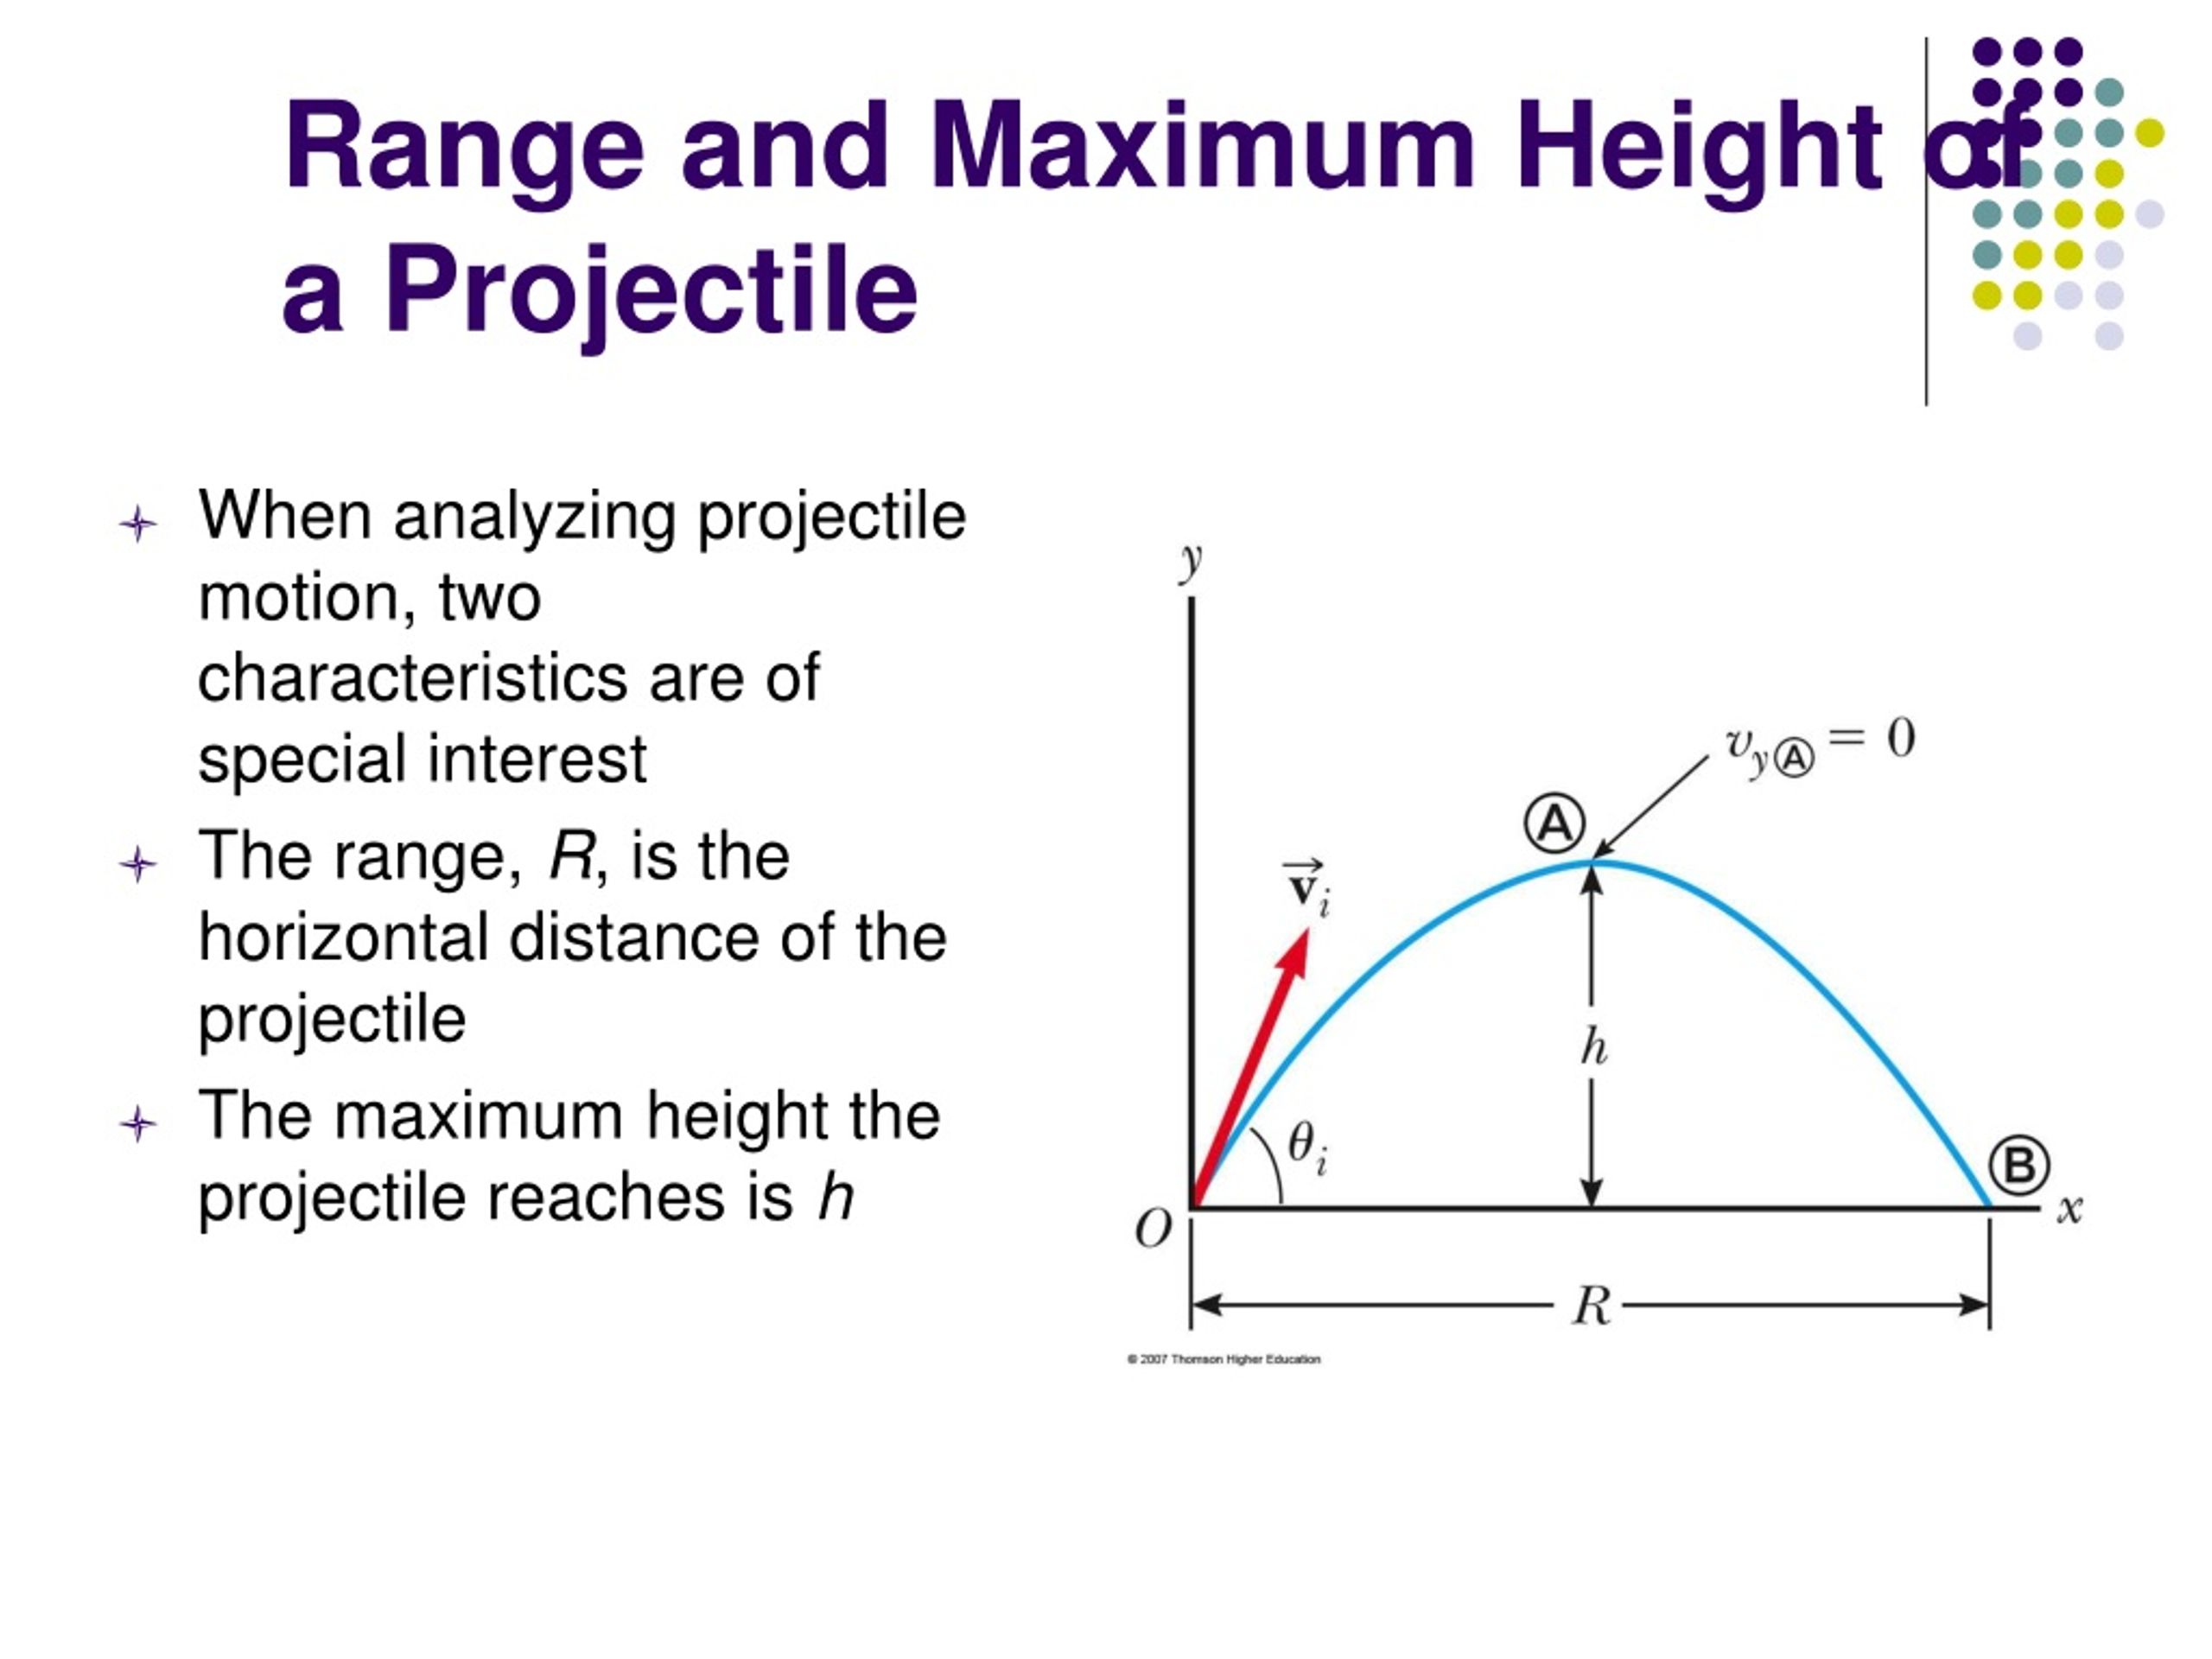 Maximum height. Projectile Motion. Range of projectile. Two dimensional Motion. Formula of range in projectile Motion.